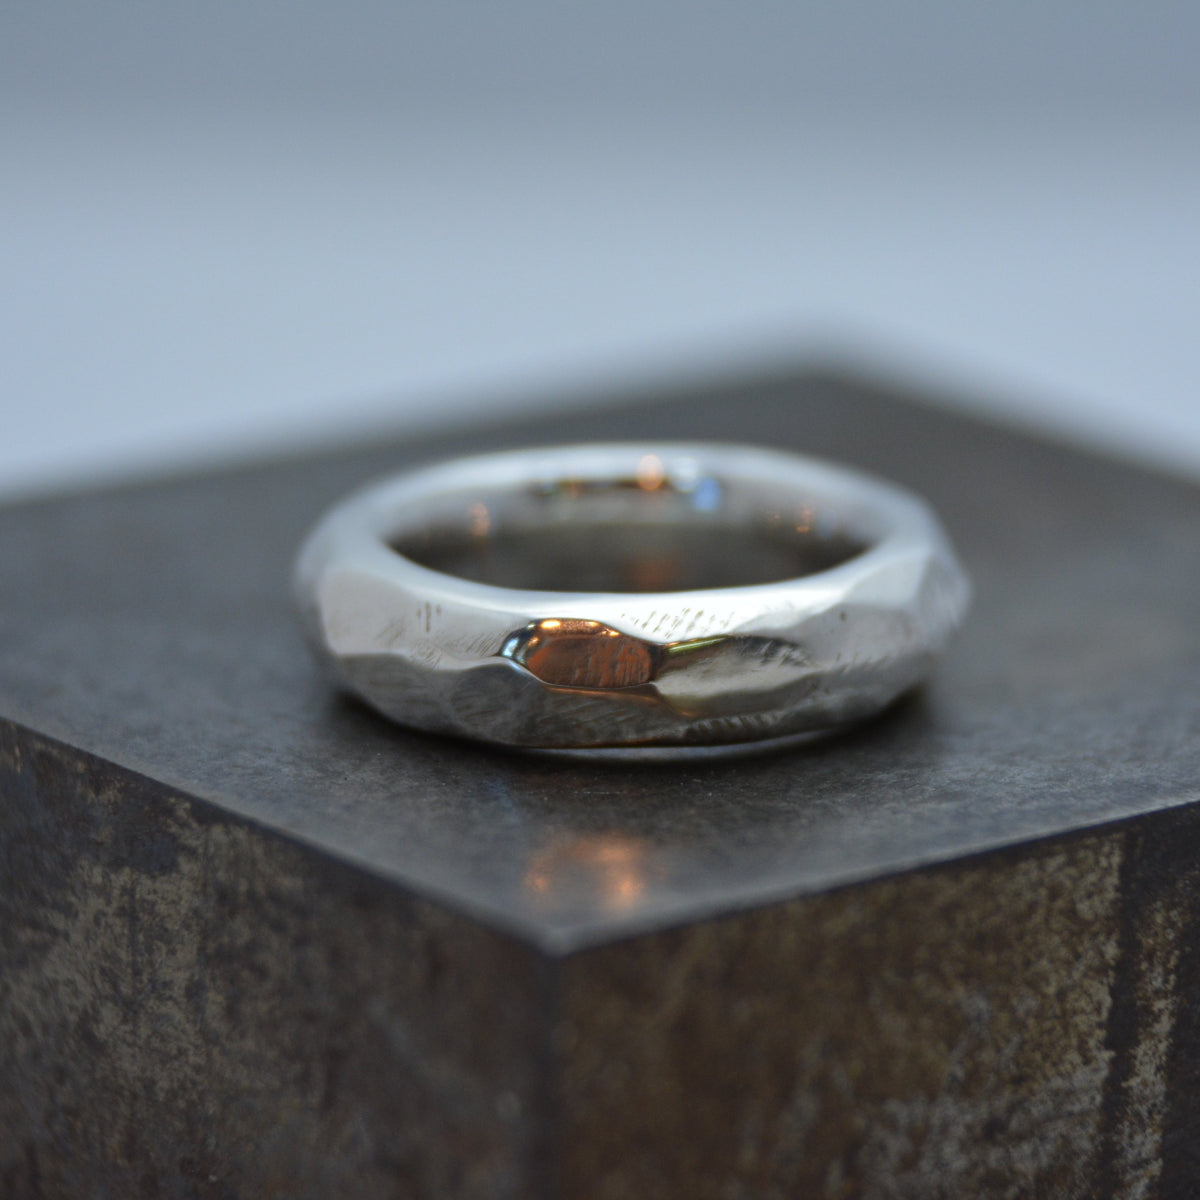 Discover Mr. Edgy: A One-of-a-Kind Solid Silver Ring with a Faceted Surface and Artistic Design